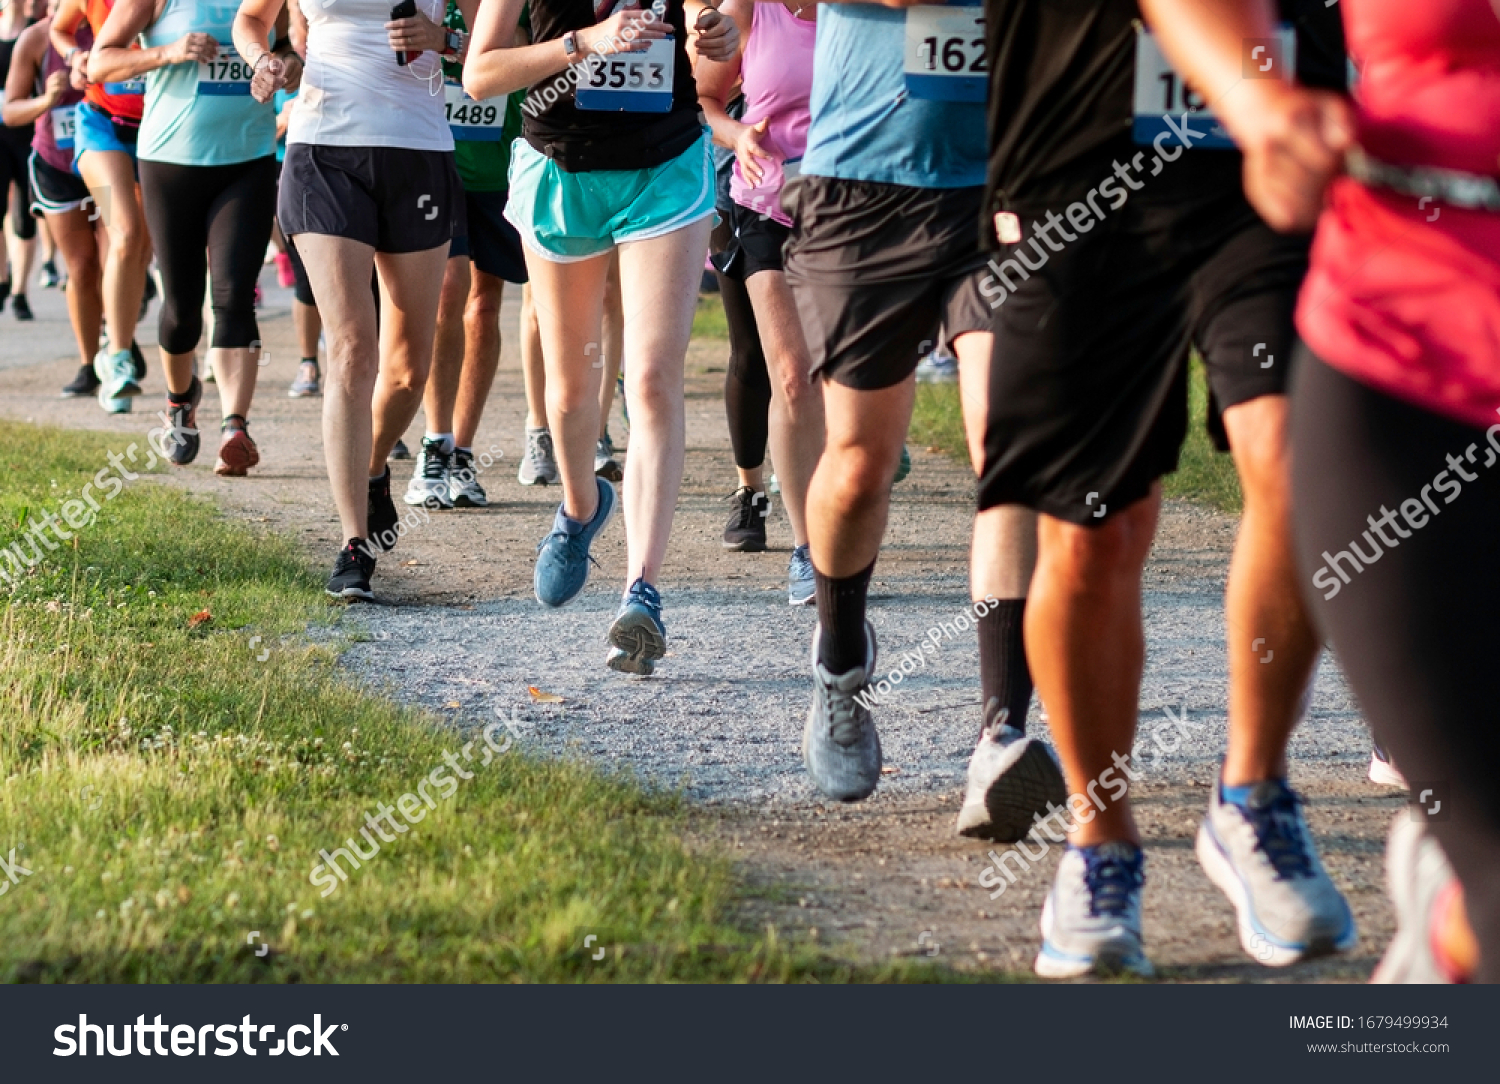 A straight line of runners racing on a dirt path in a State Park during a 5K community race. #1679499934